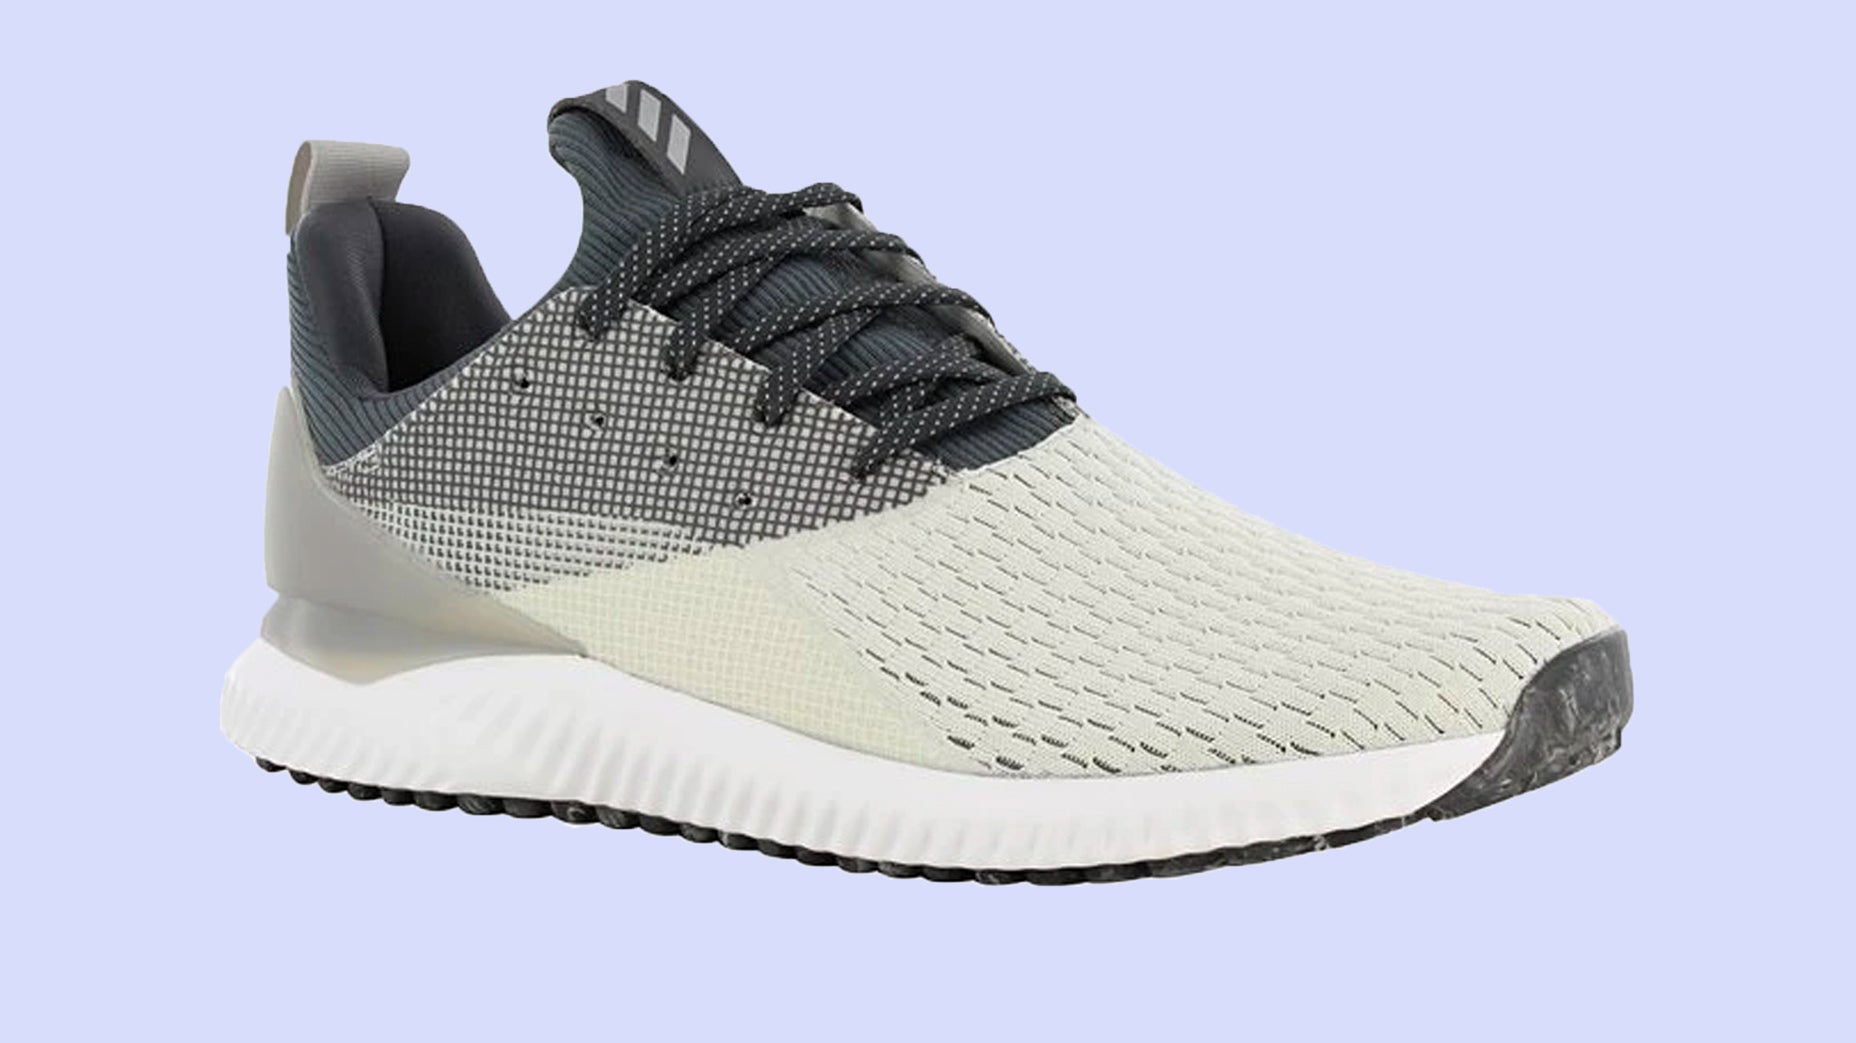 These sporty and casual Adidas Adicross Bounce are the deal of the 